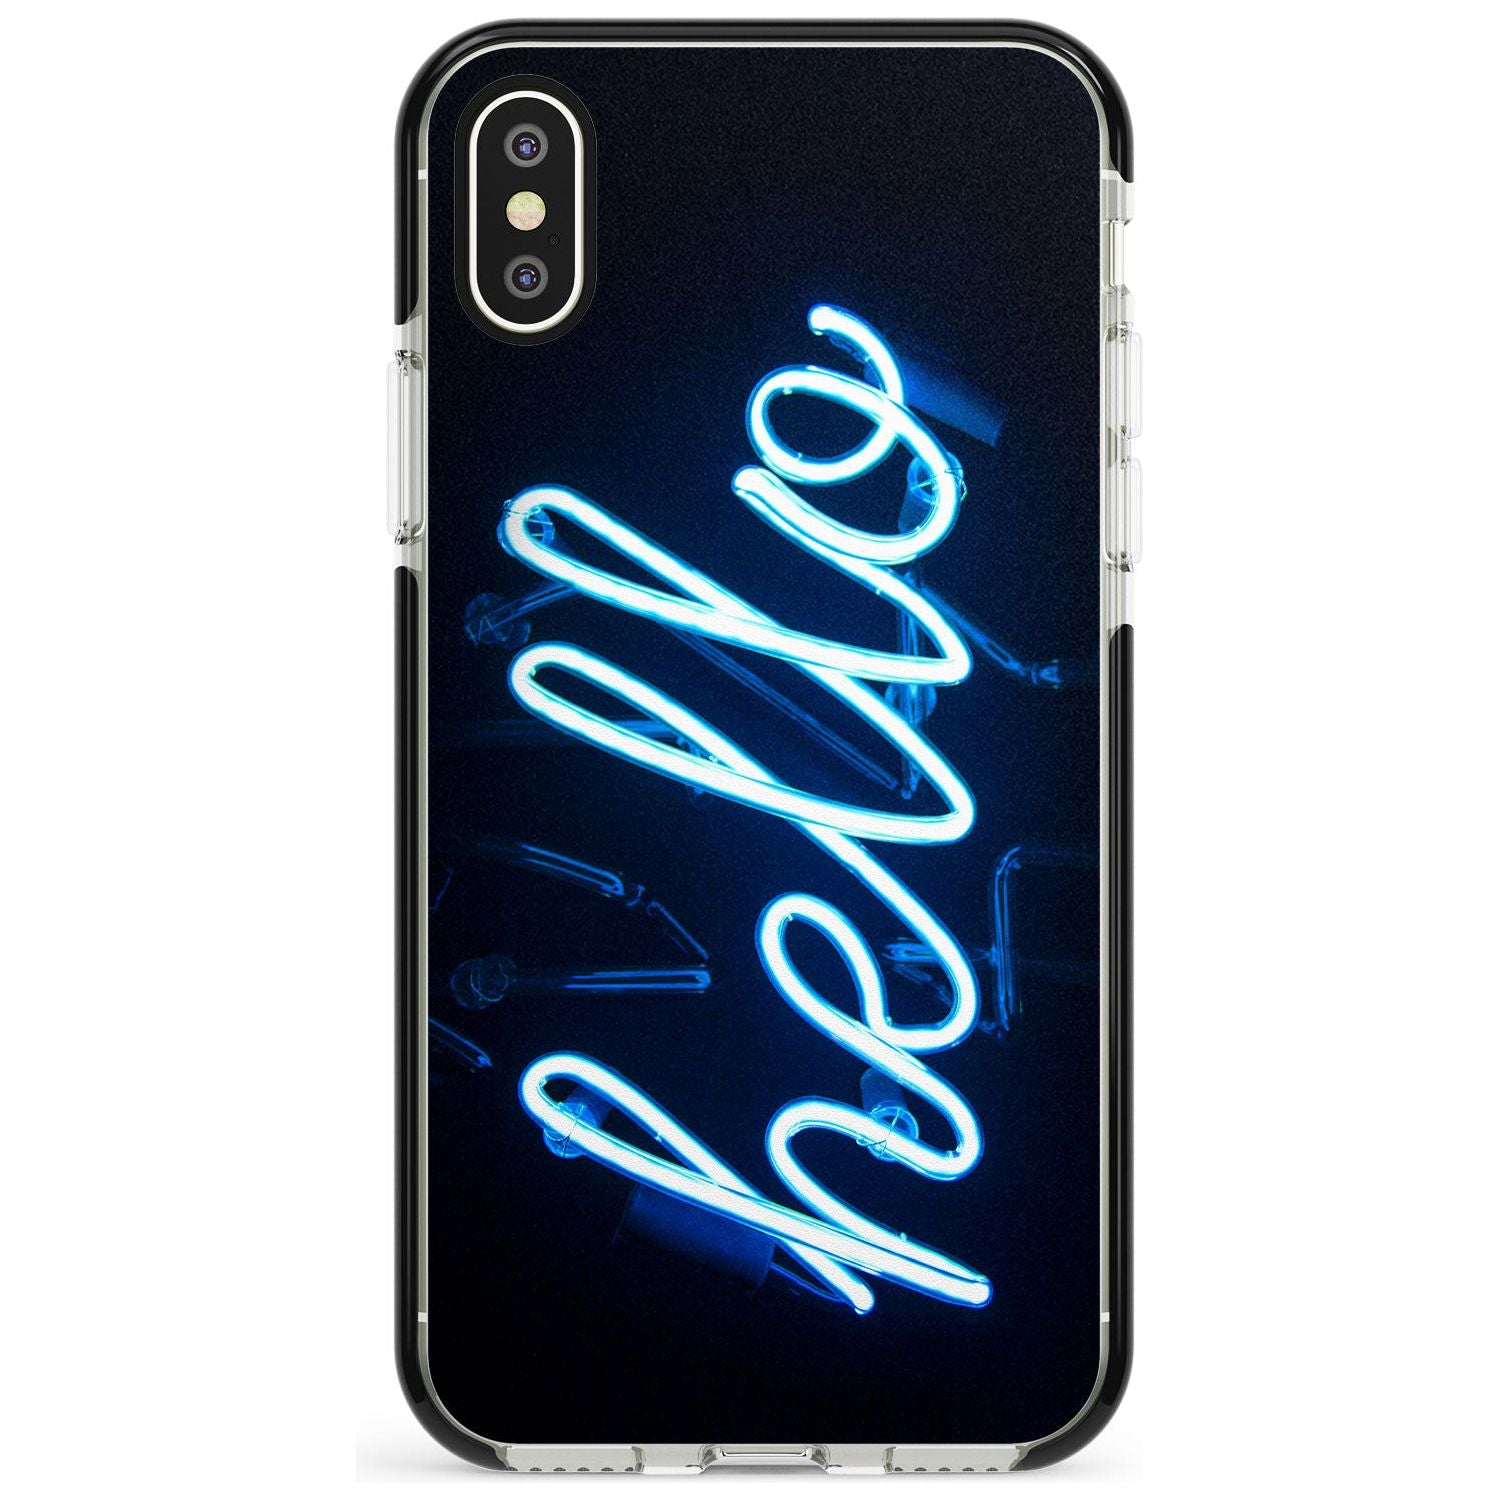 "Hello" Blue Cursive Neon Sign Black Impact Phone Case for iPhone X XS Max XR